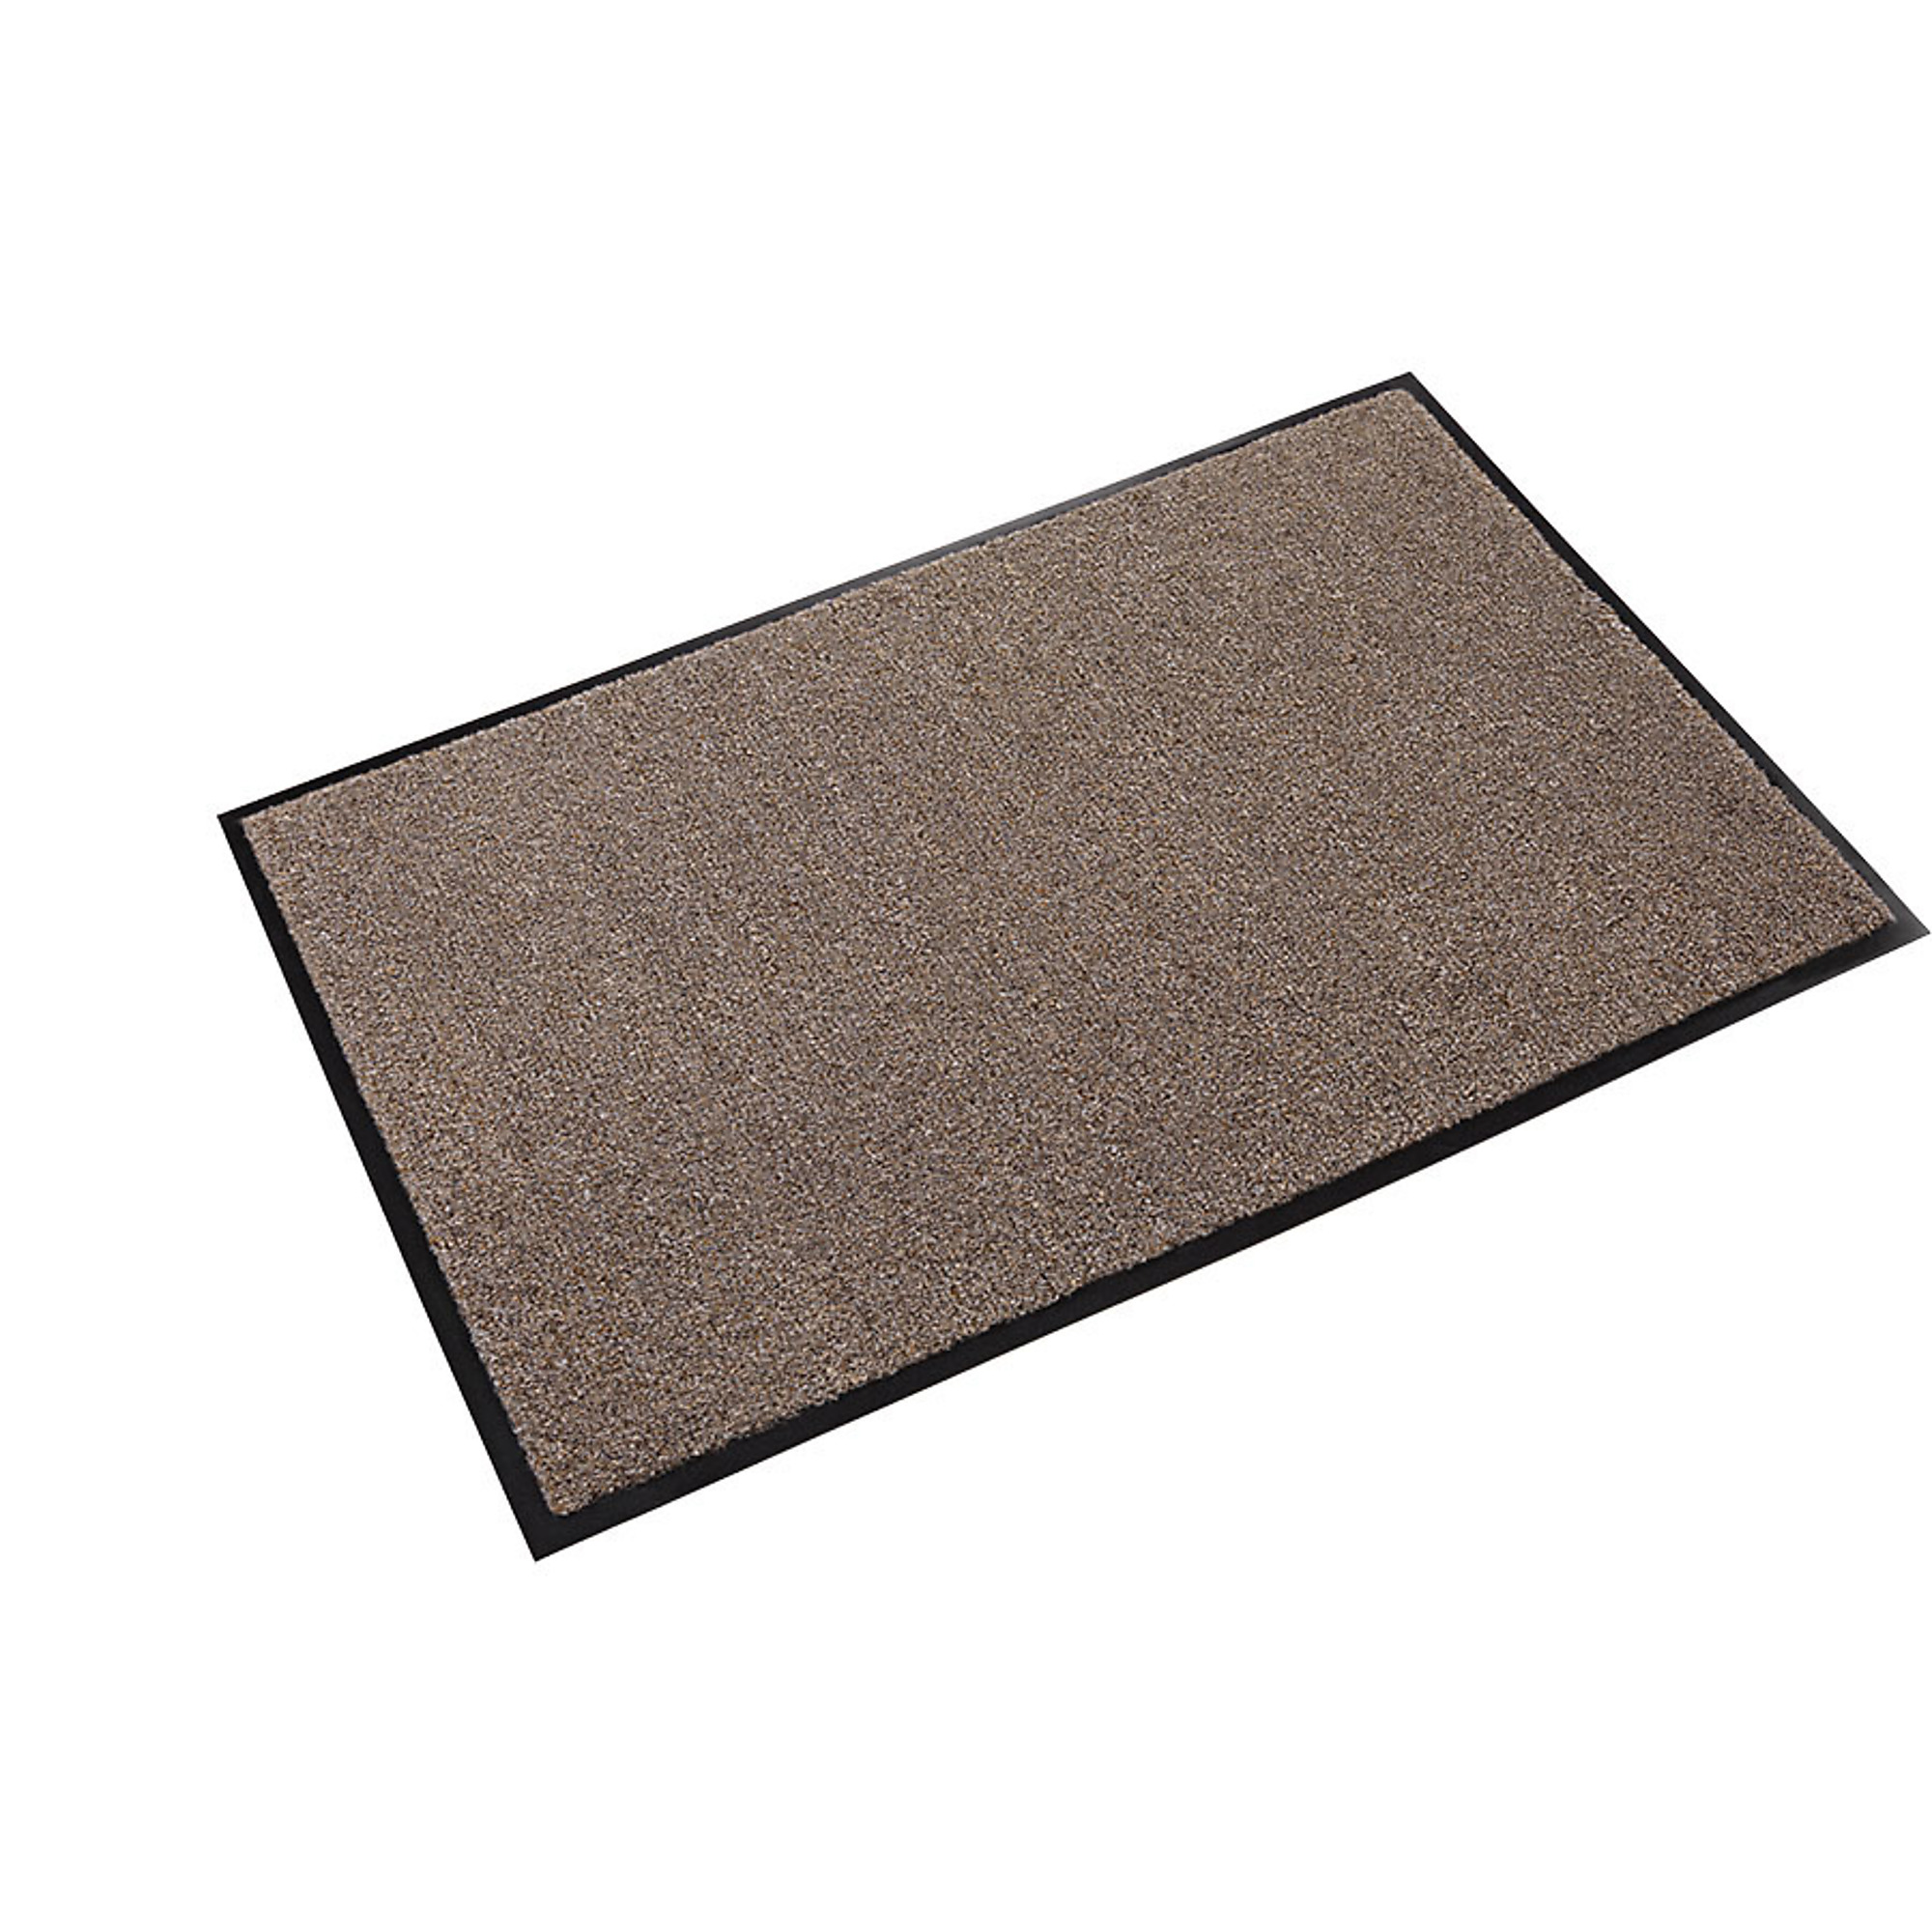 Crown Matting Technologies, Rely-On Olefin 4ft.x60ft. Pebble Brown, Width 48 in, Length 720 in, Thickness 3/8 in, Model GSR0048PB